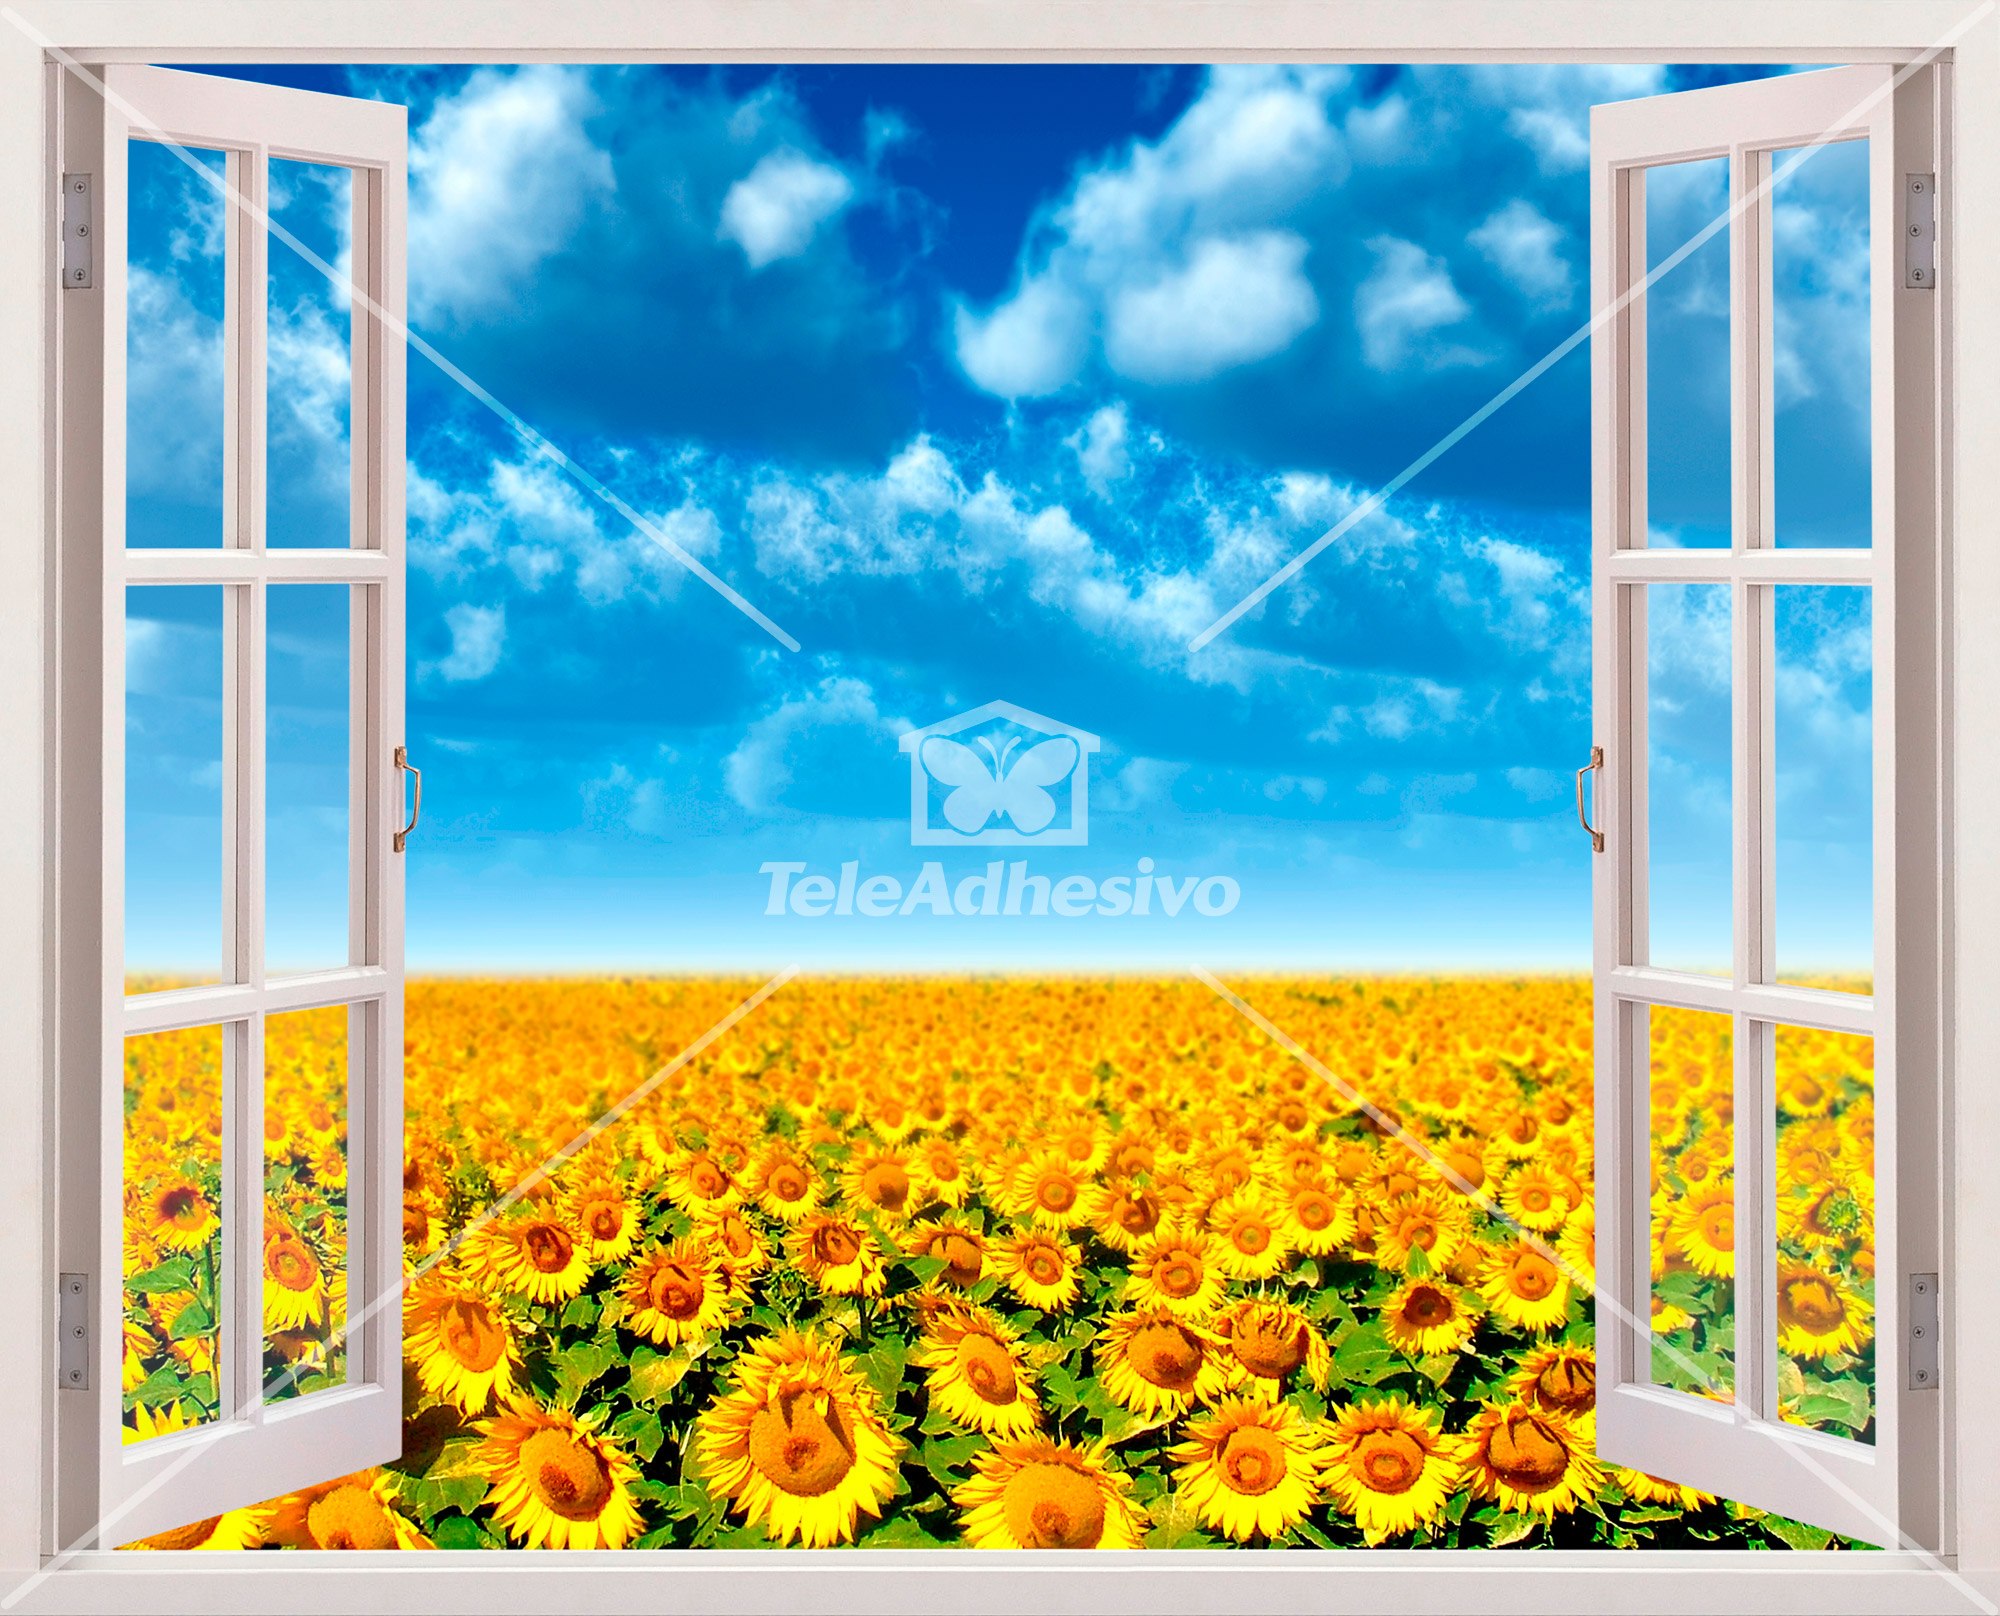 Wall Stickers: Field of sunflowers